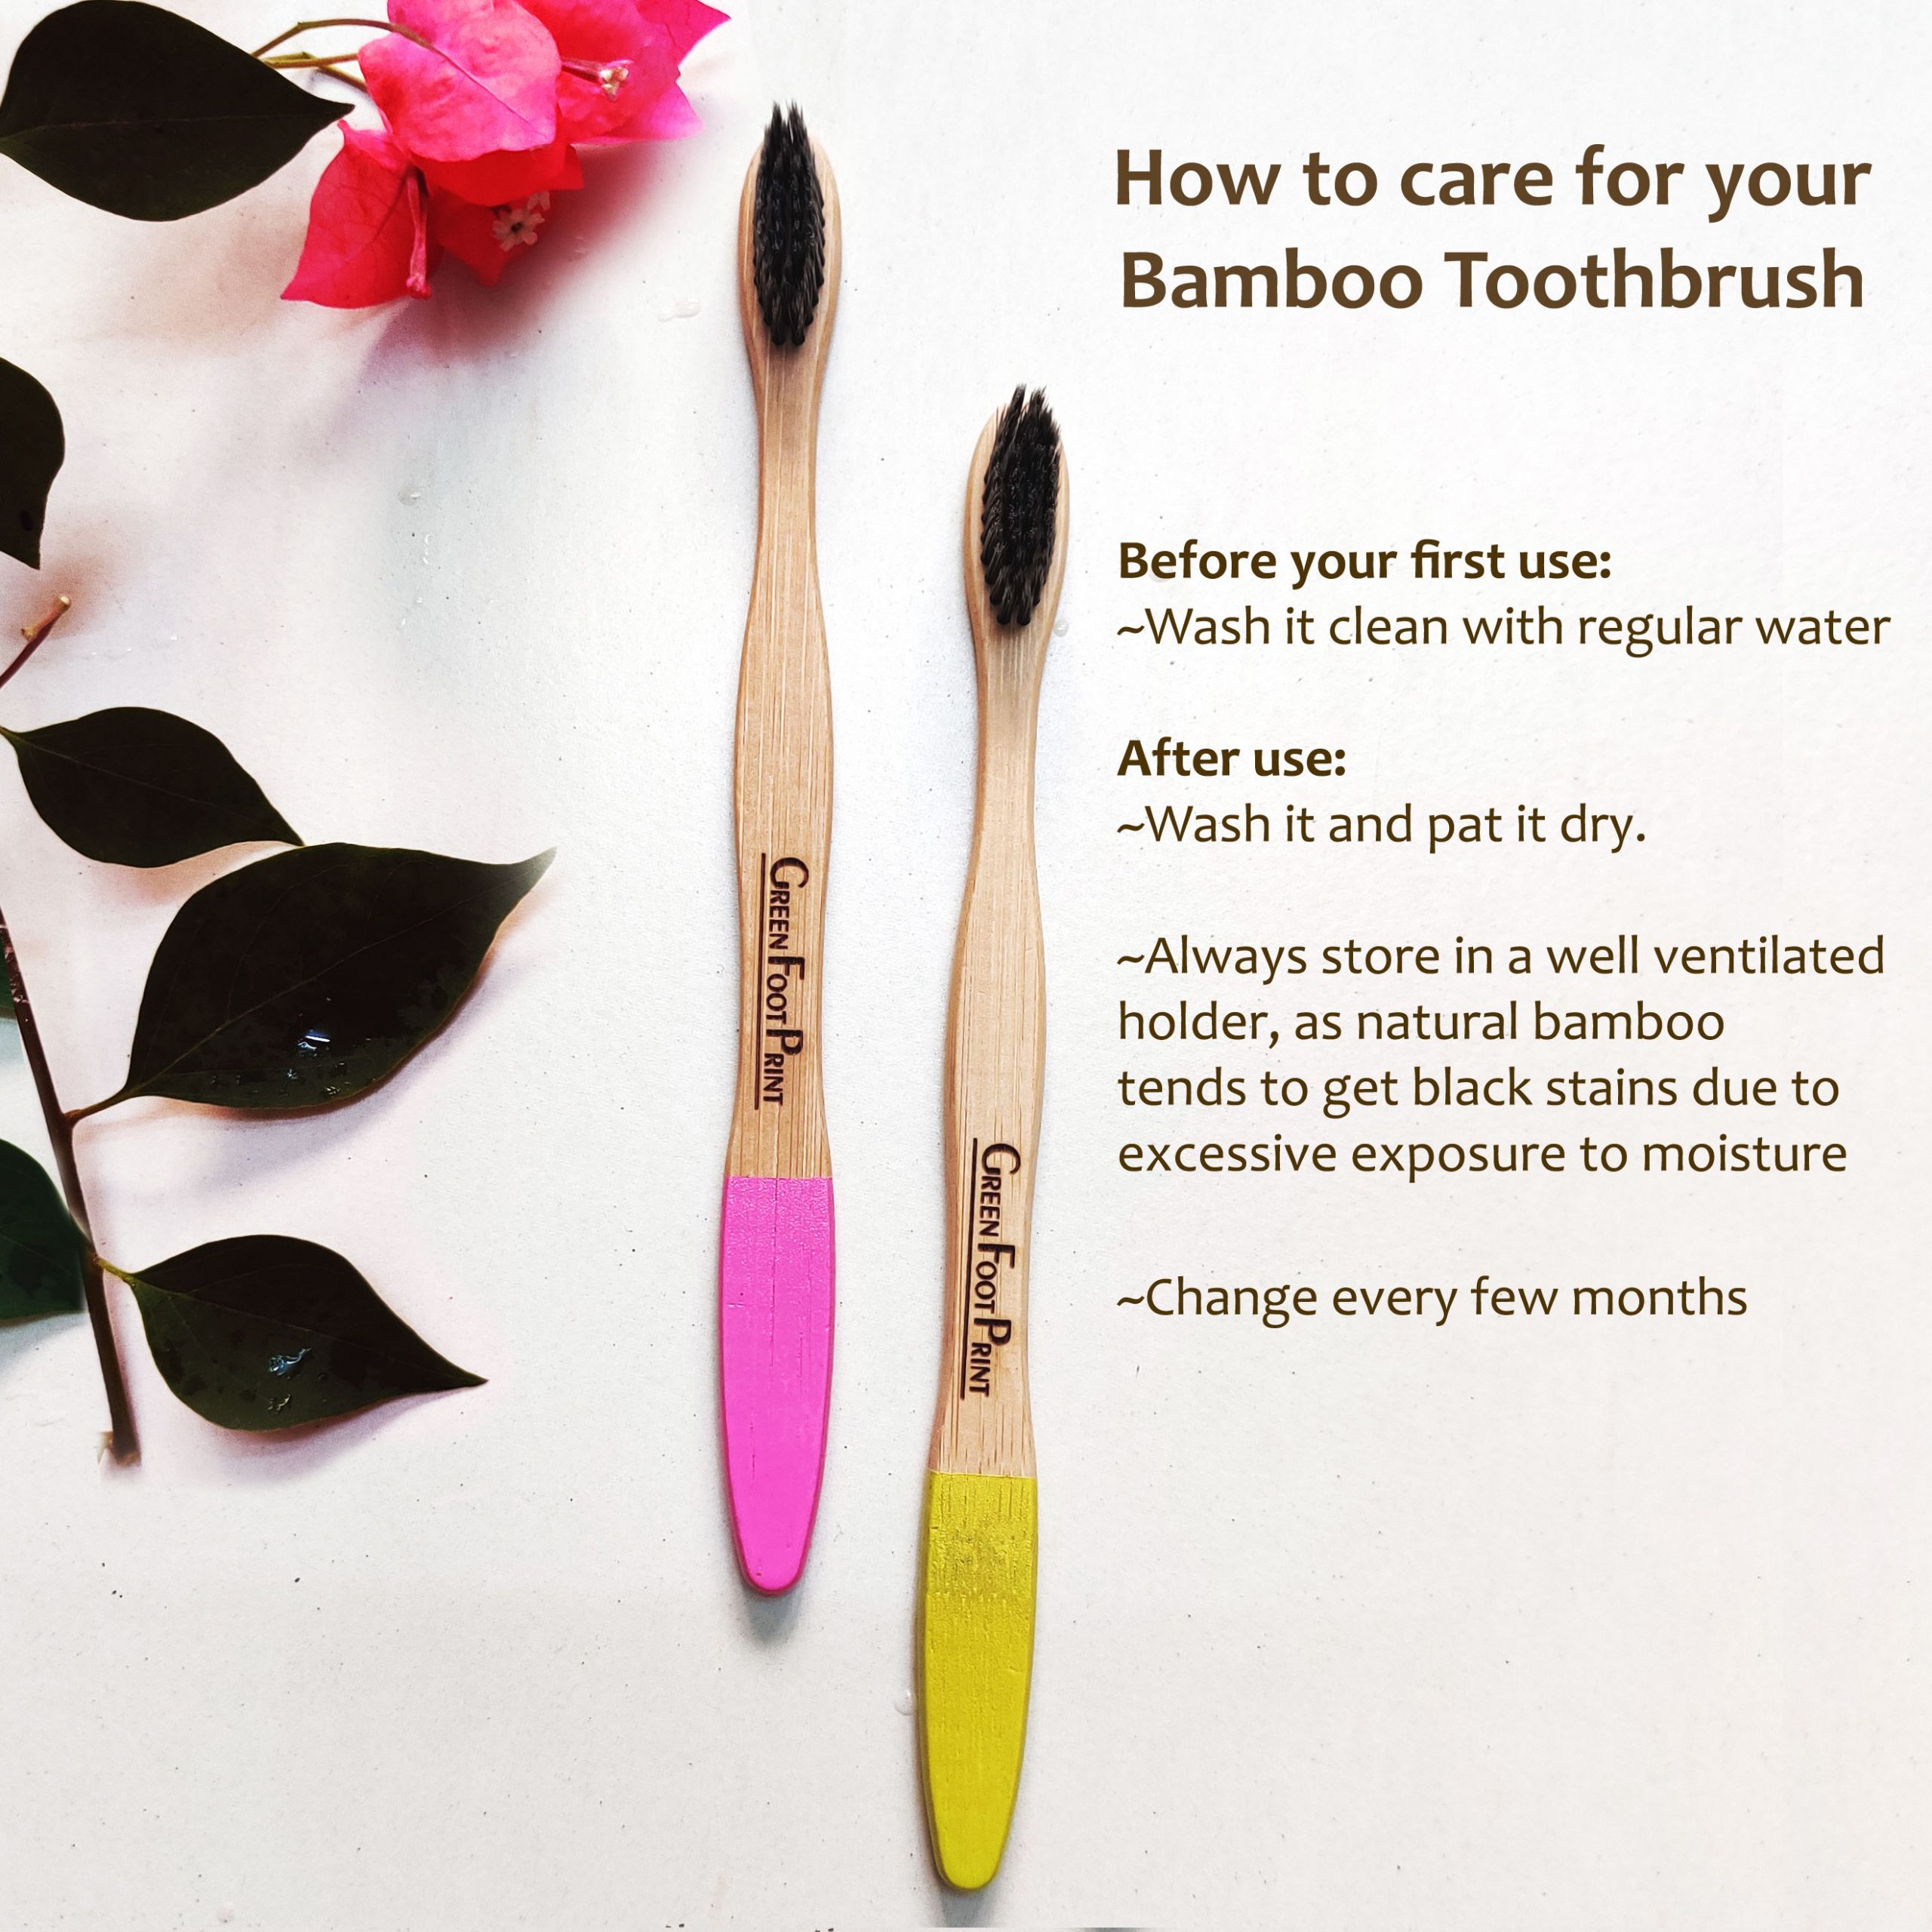 Guide on how to care for your bamboo tooth brush